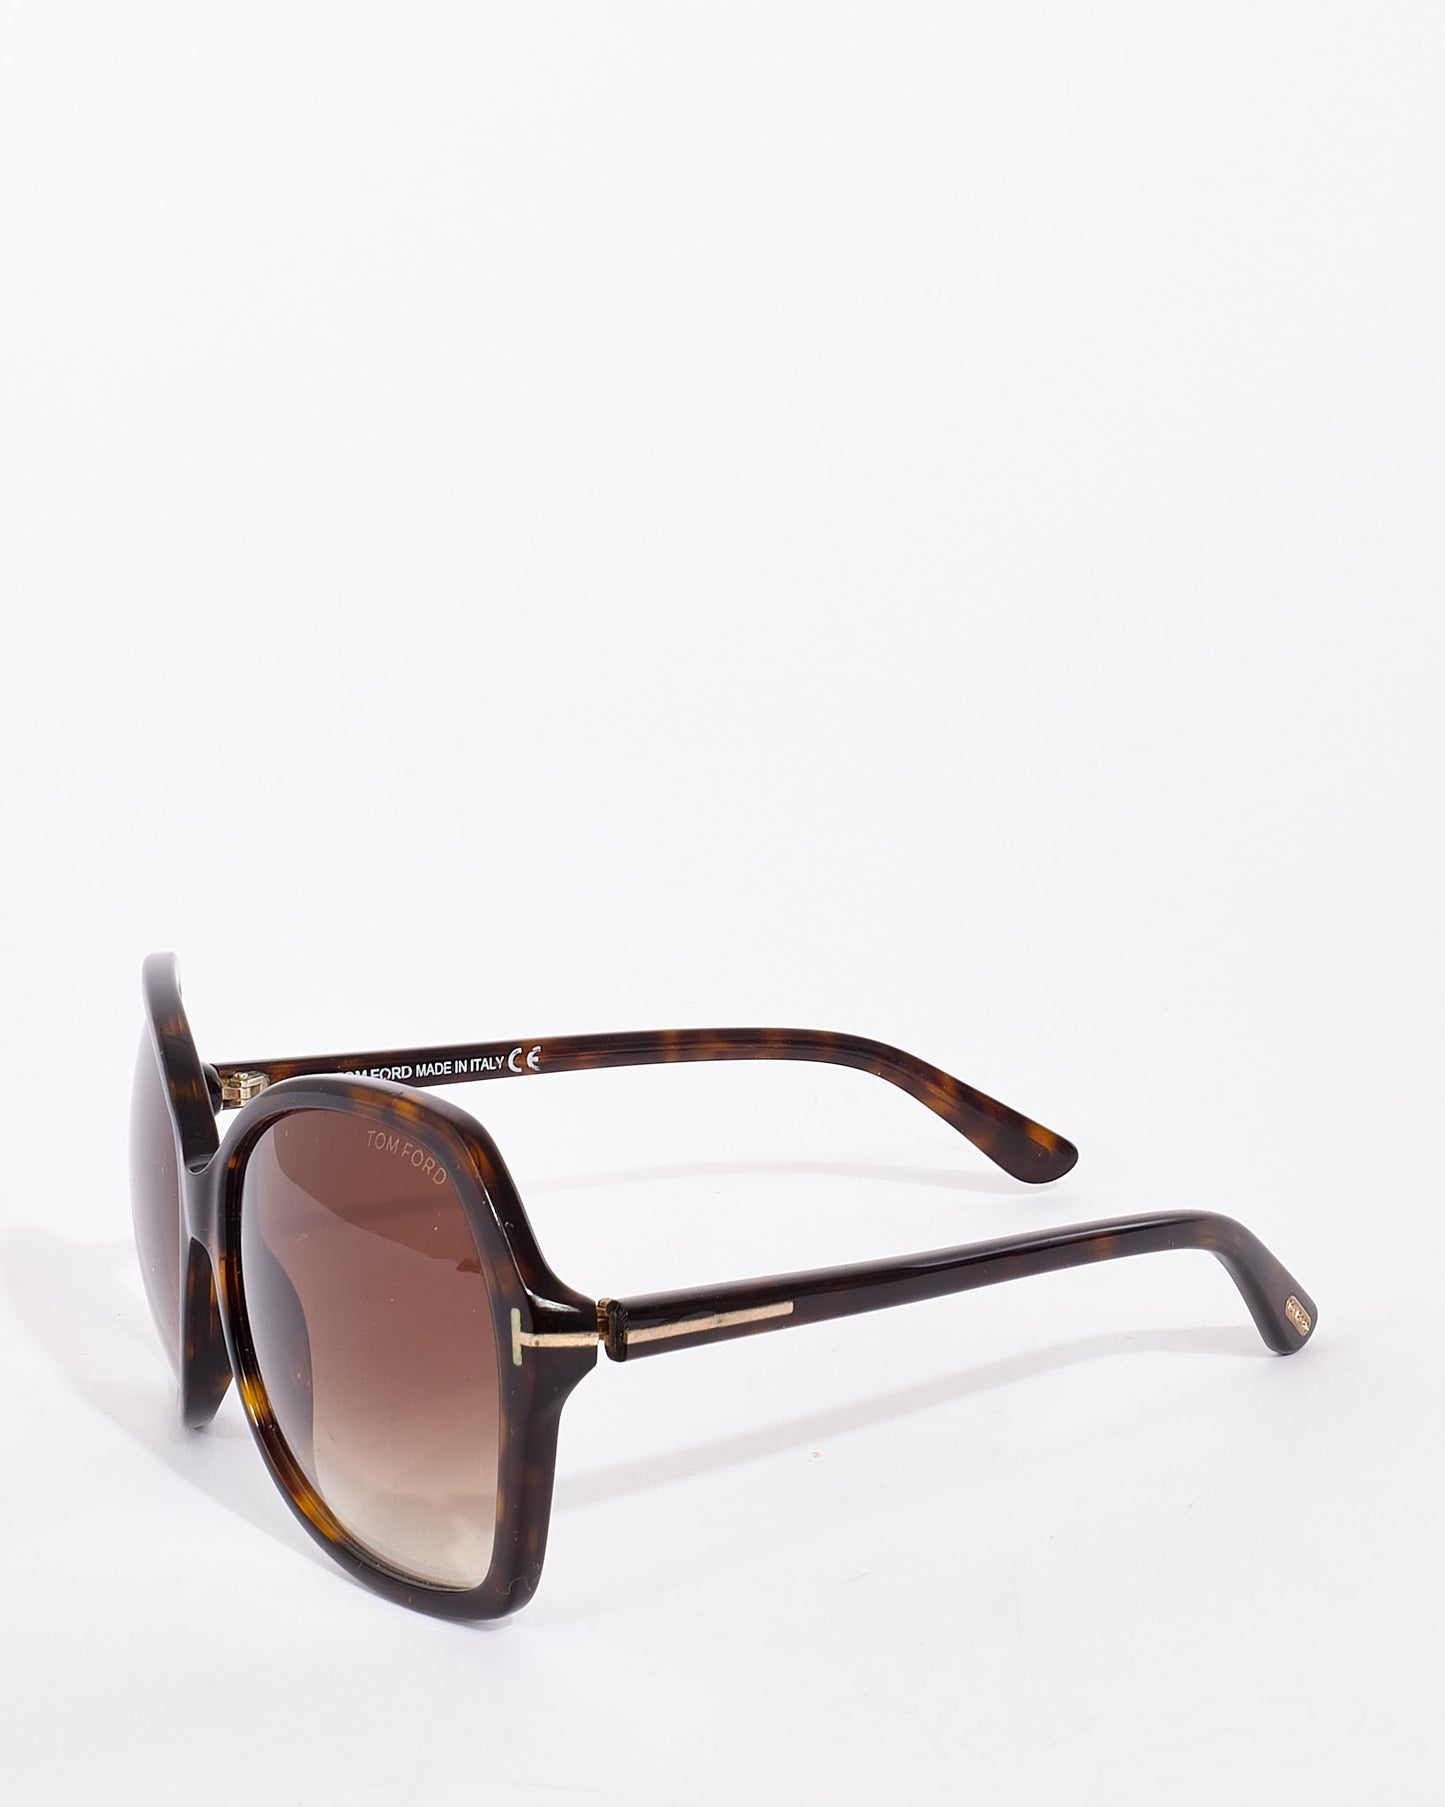 Tom Ford Brown Acetate Tortoise TF 328 Butterfly Sunglasses